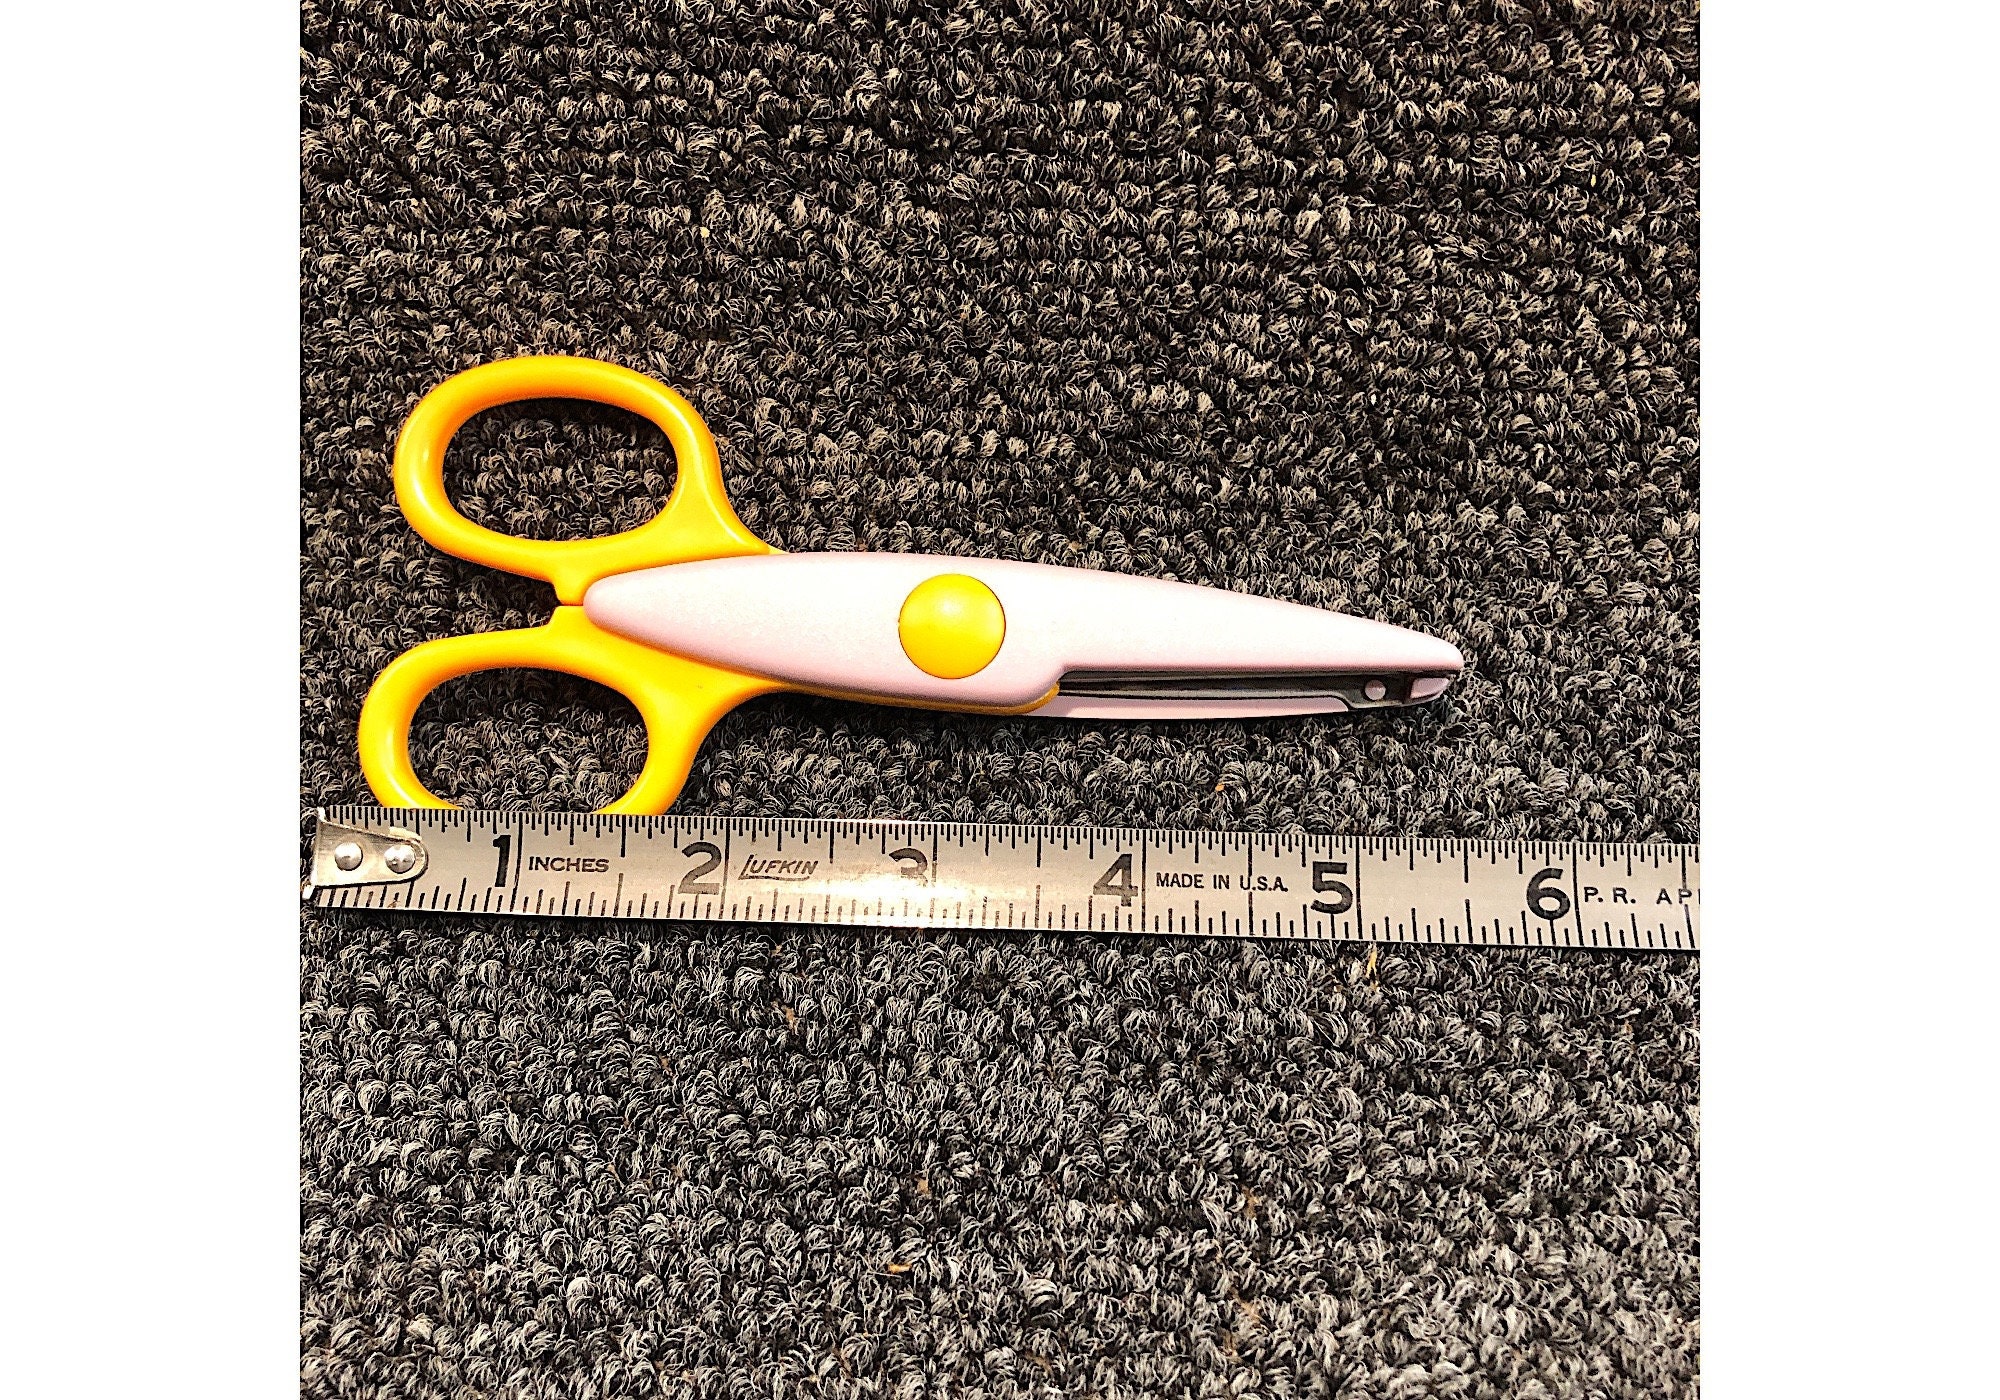 Cool Cuts Safety Scissors - Greenpoint Toys